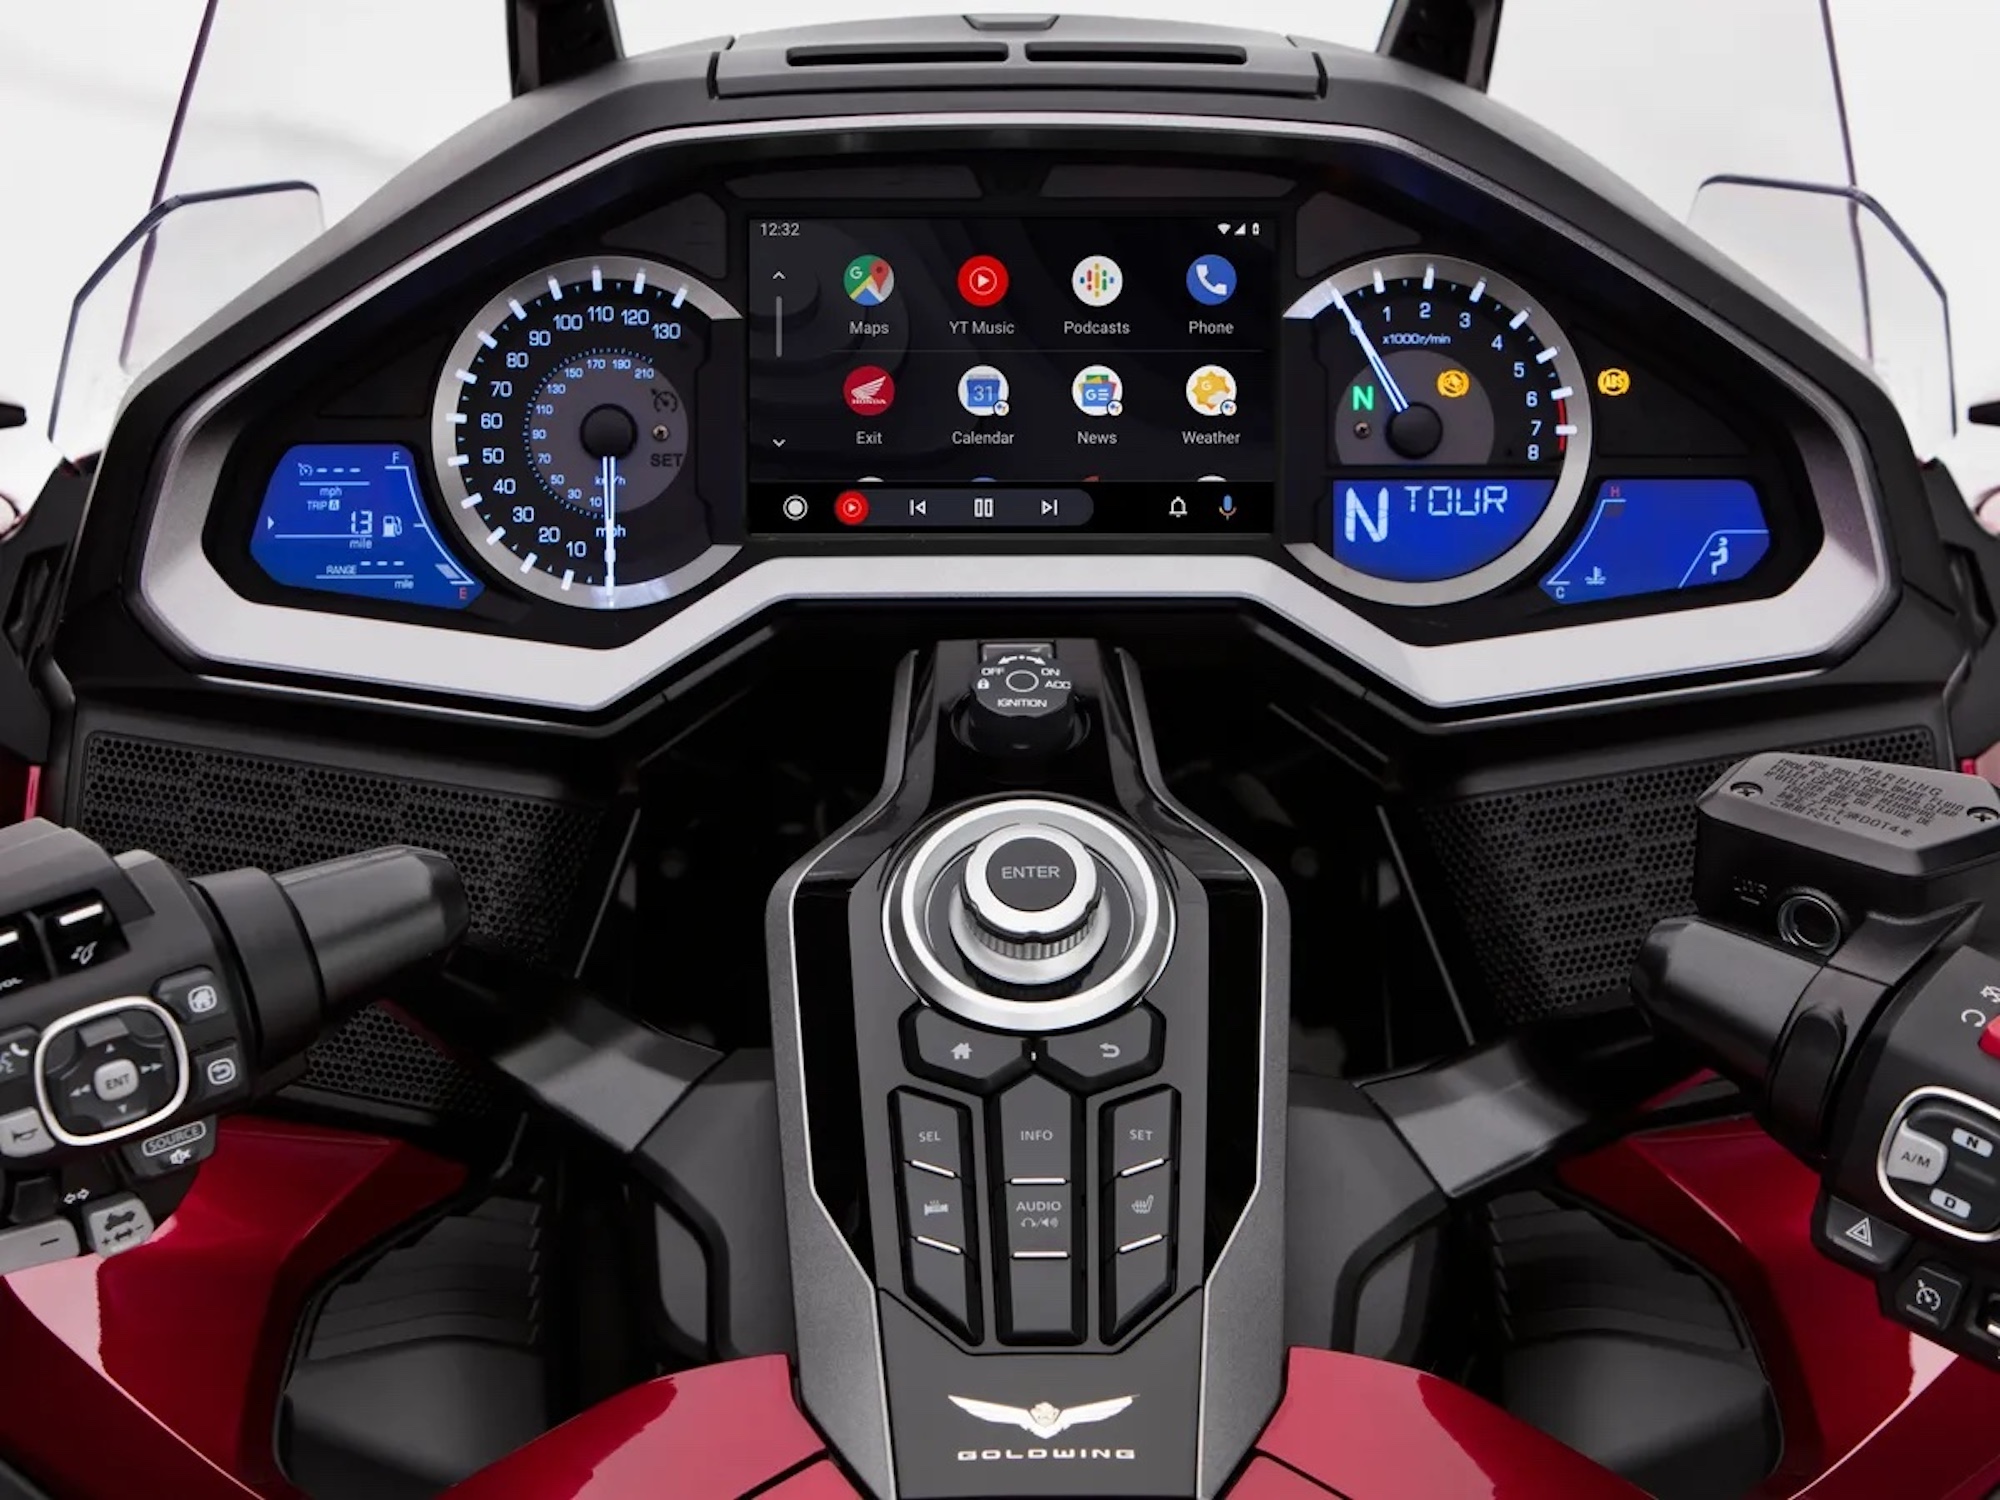 The dash of a motorcycle.